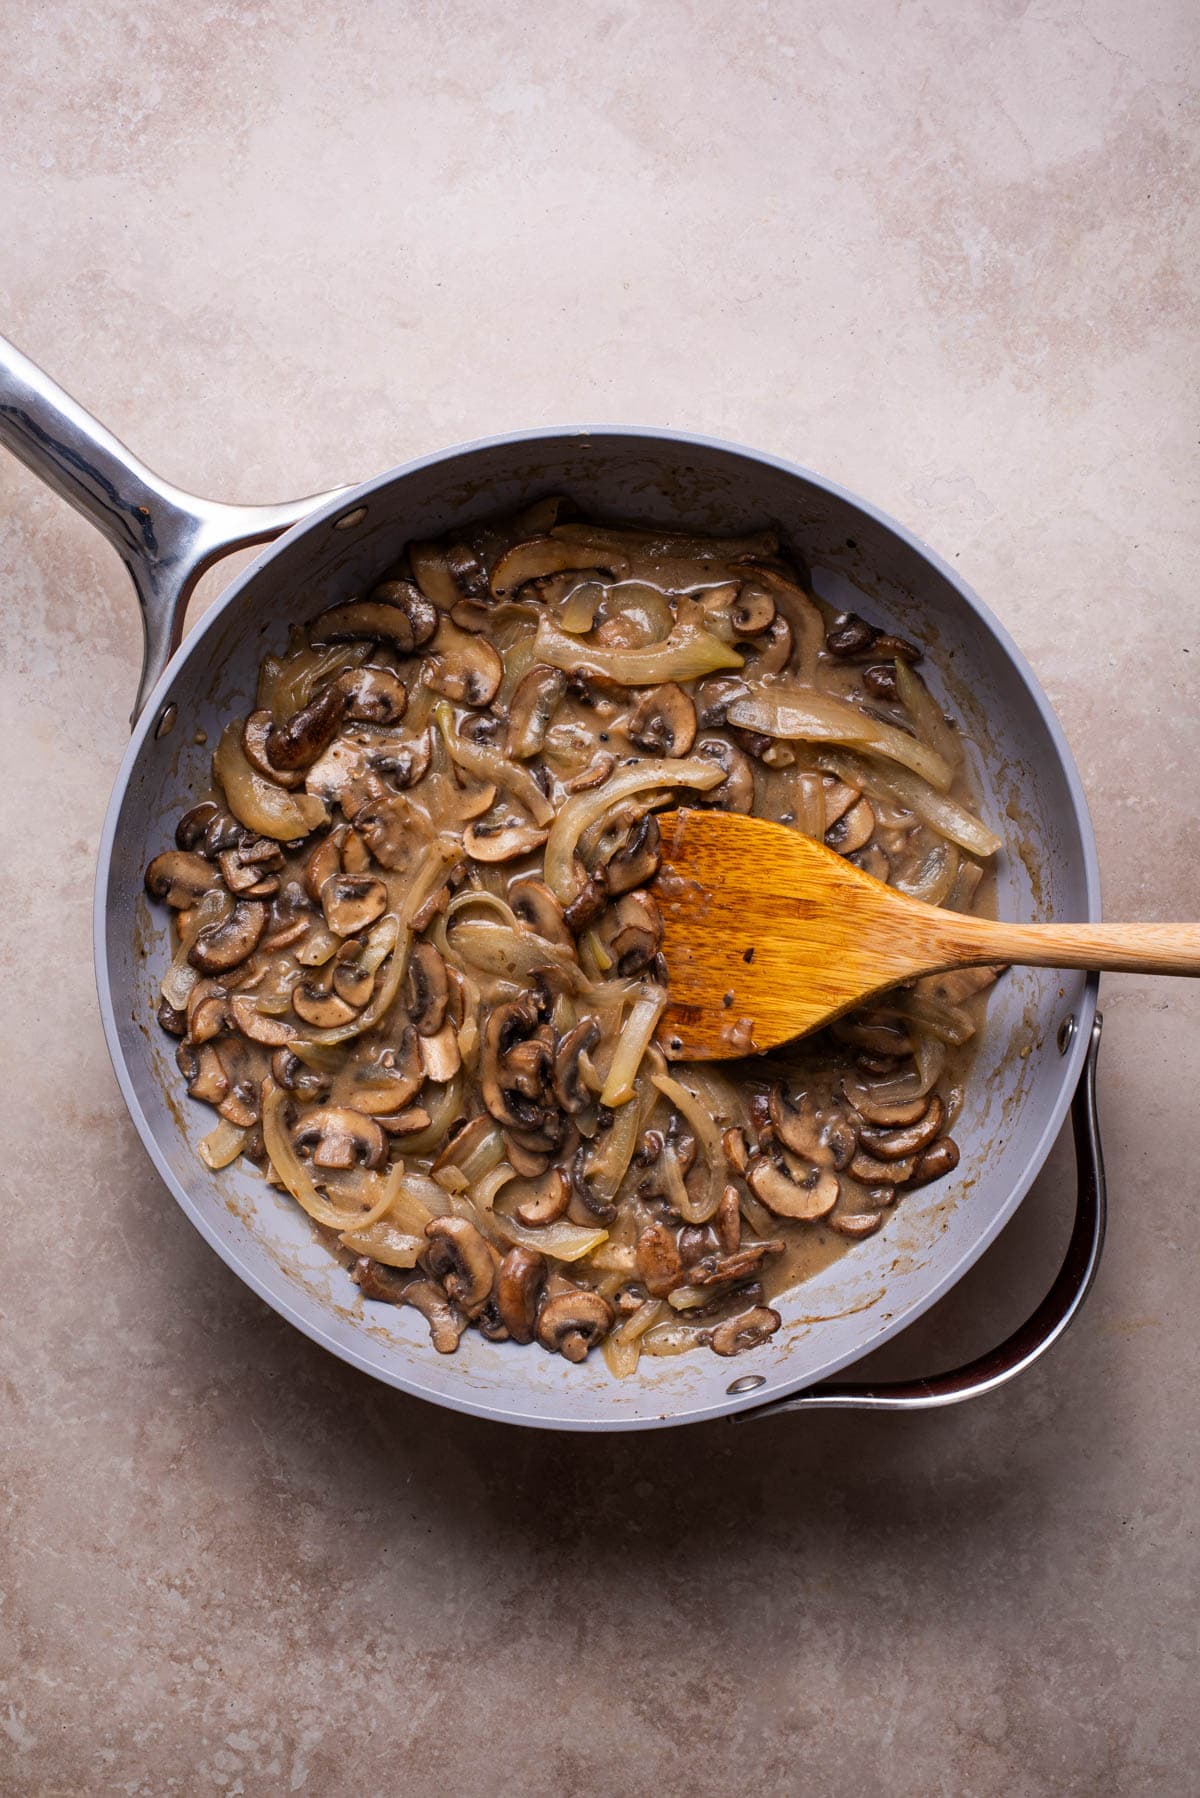 Creamy mushrooms and onions in a skillet.